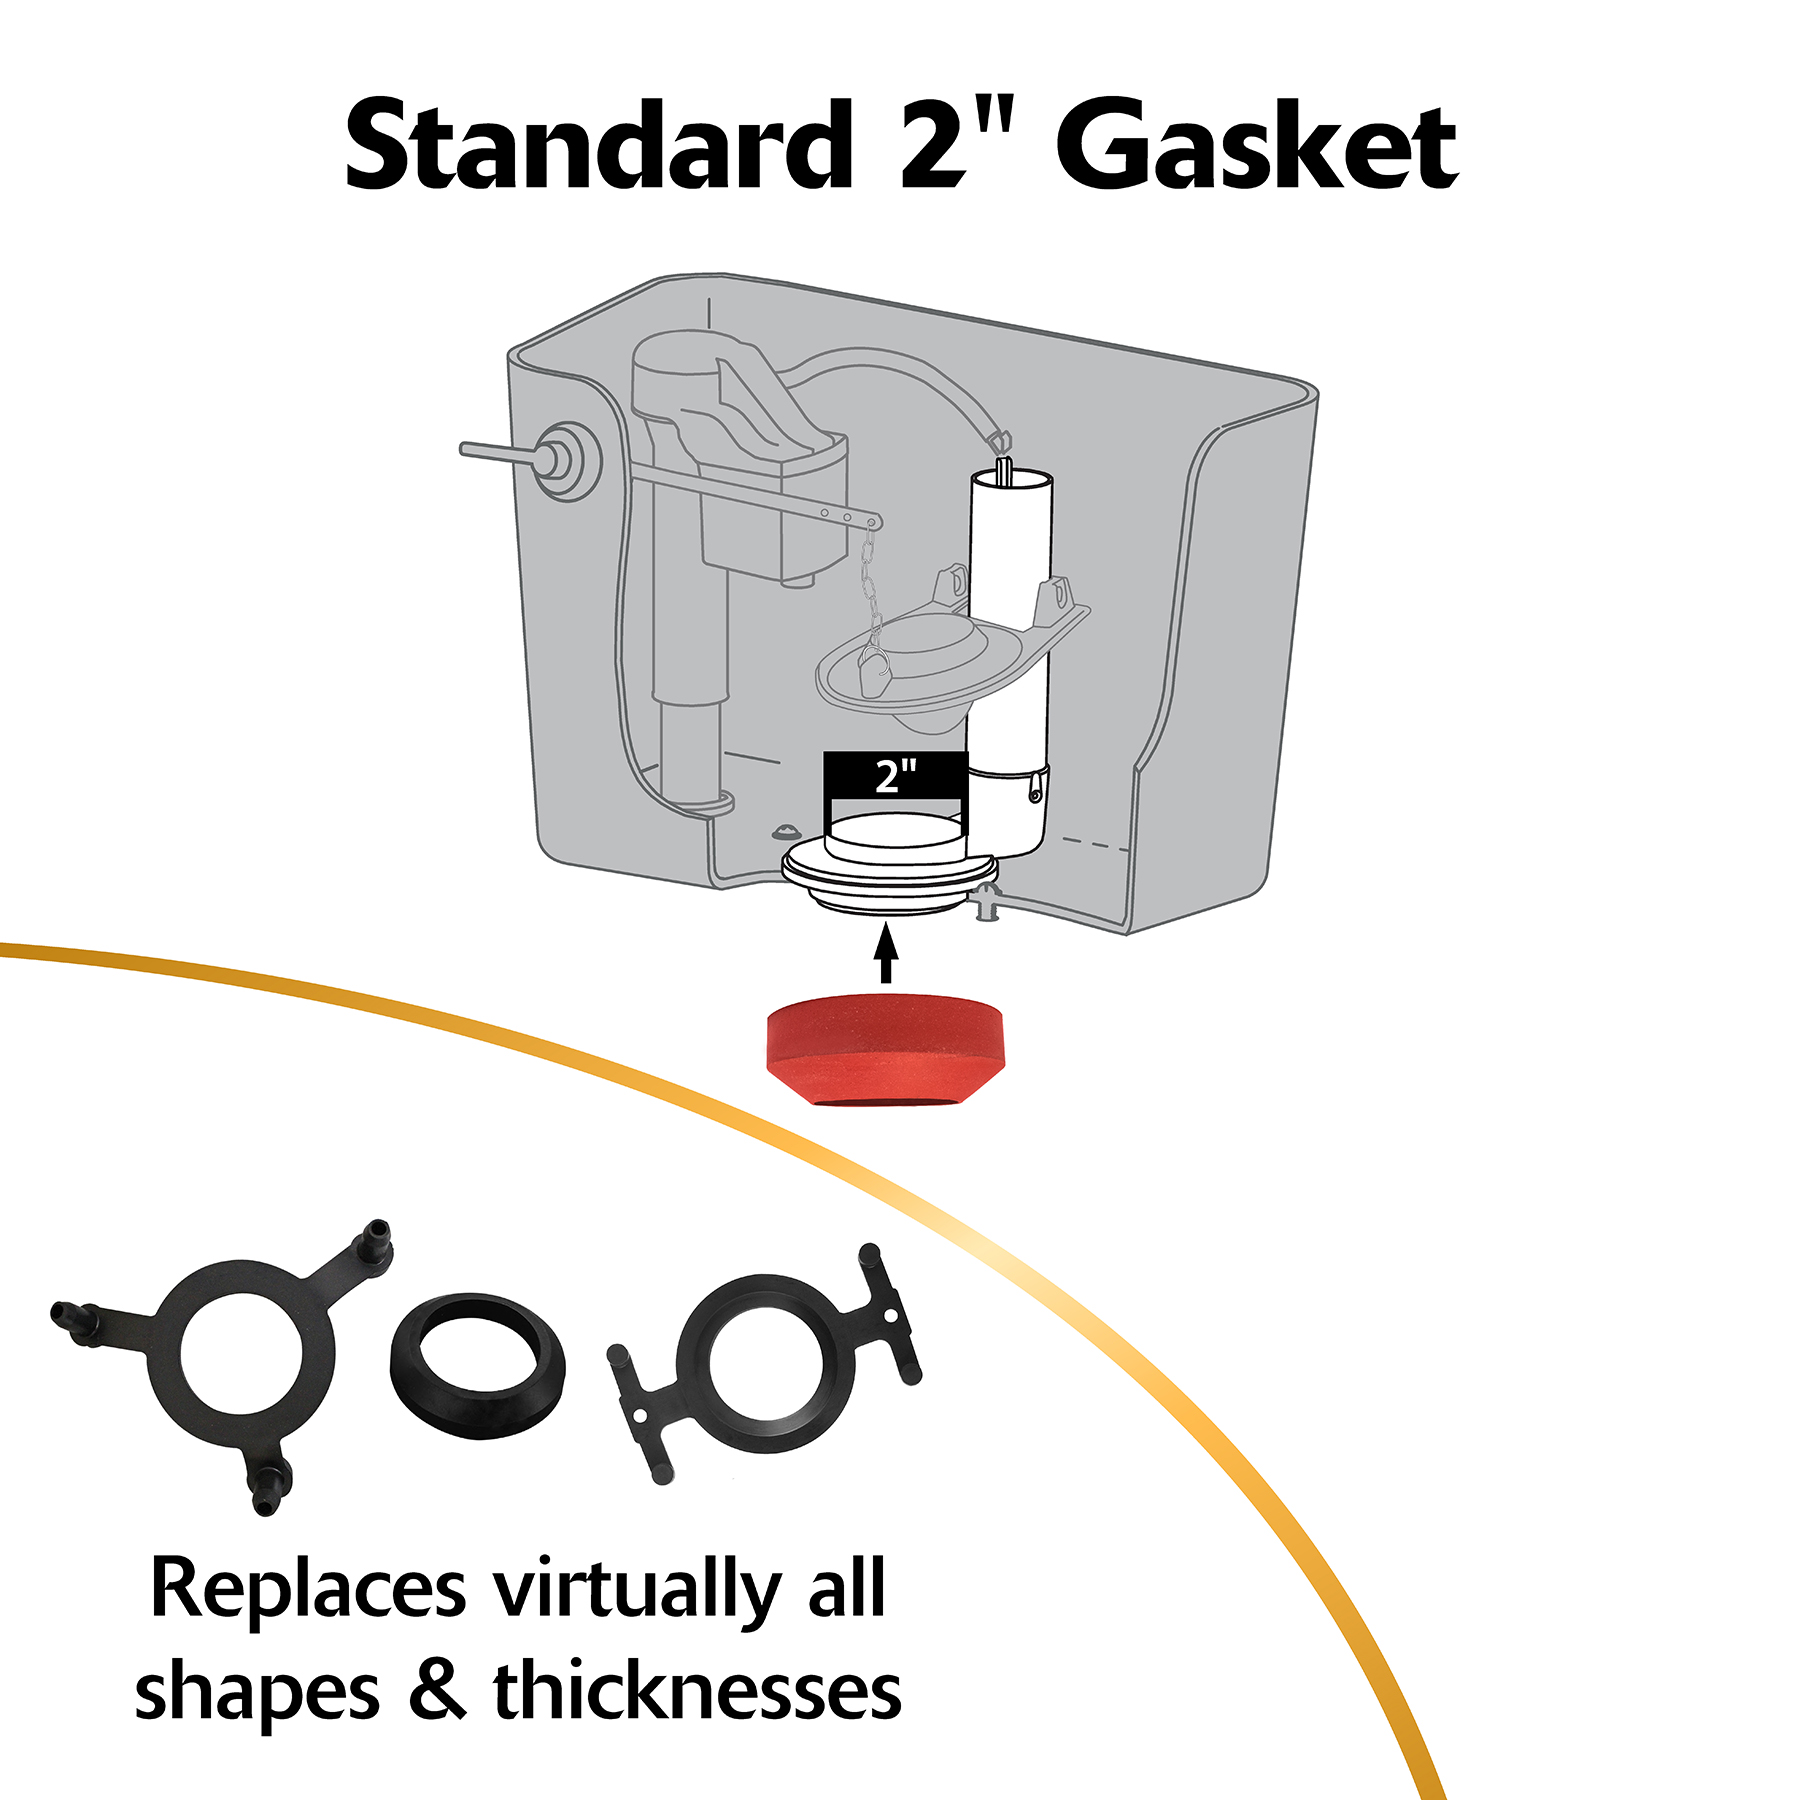 Standard 2 inch gasket replaces all shapes and thicknesses